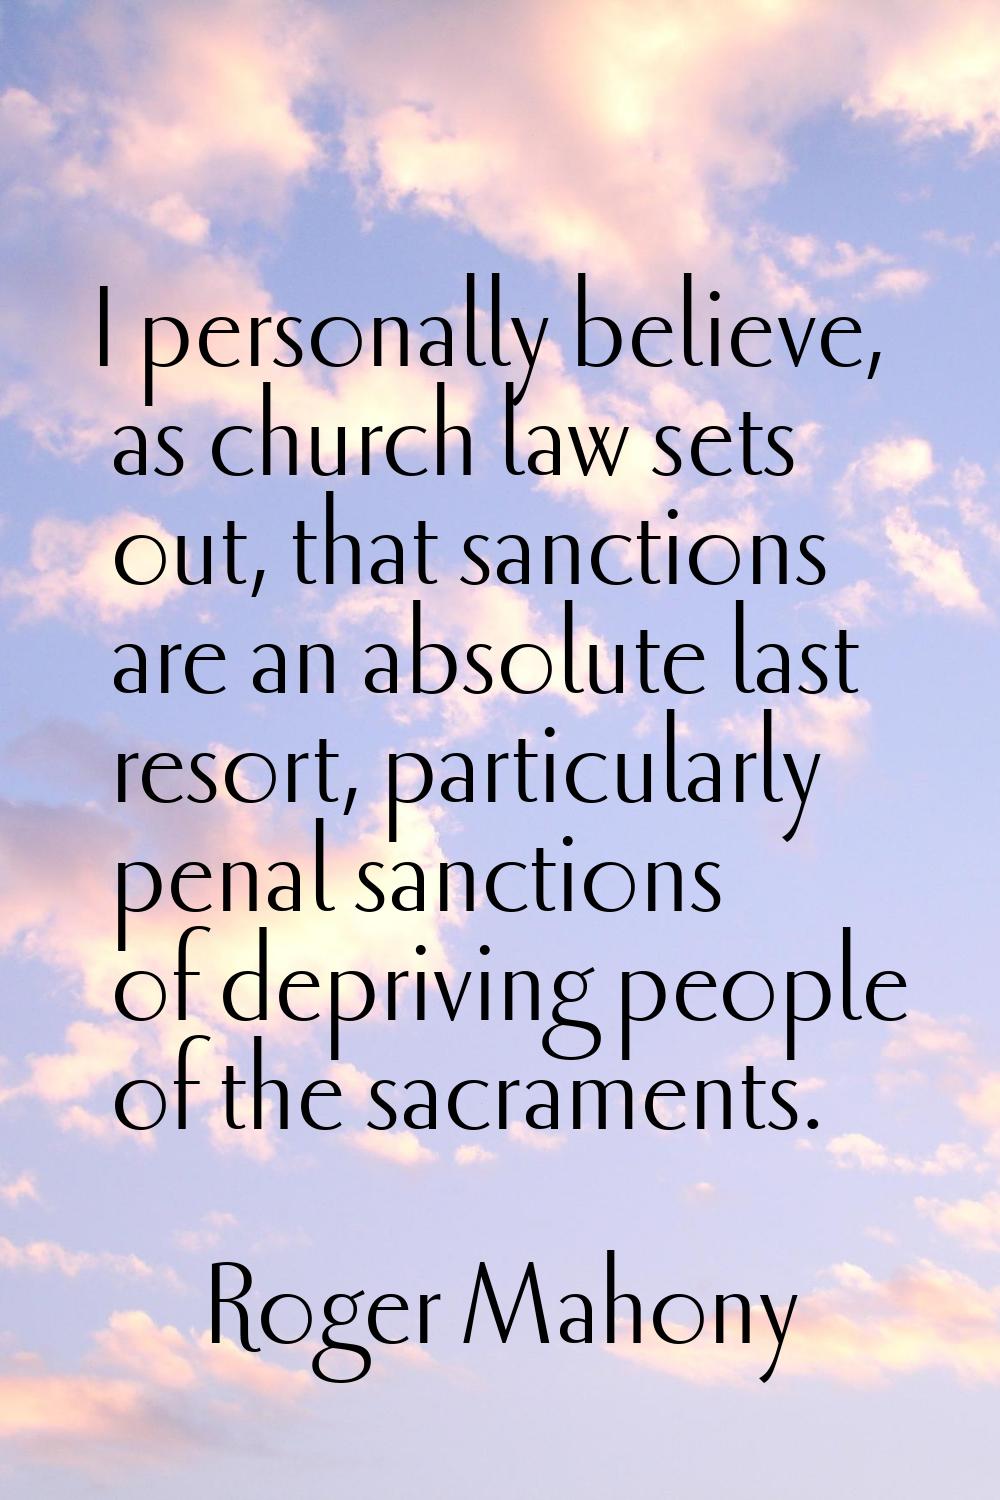 I personally believe, as church law sets out, that sanctions are an absolute last resort, particula